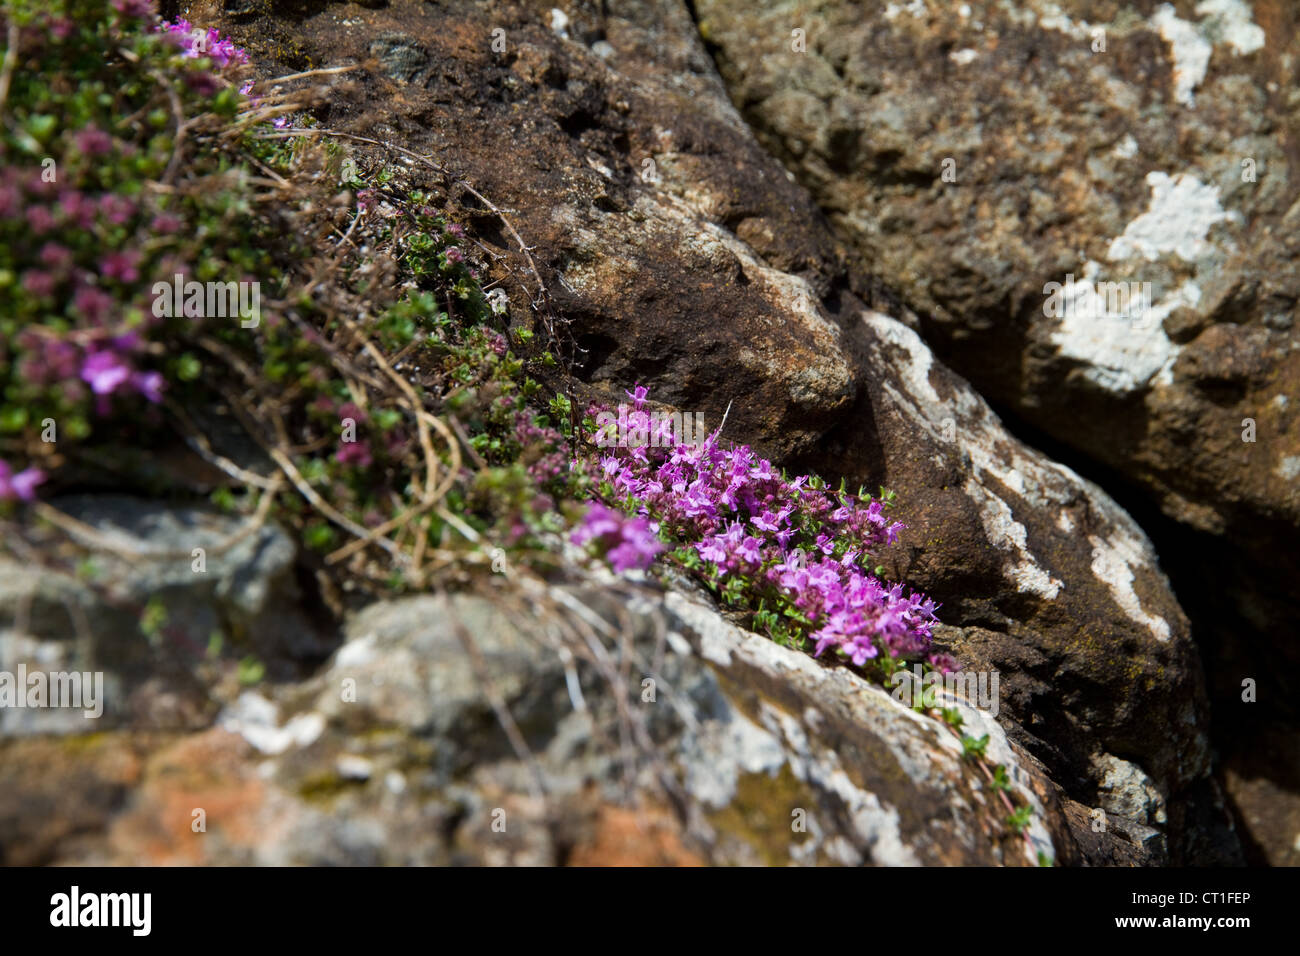 Wild thyme (Thymus serpyllum) clings to lichen-covered rocks on the Isle of Canna, Small Isles, Scotland Stock Photo